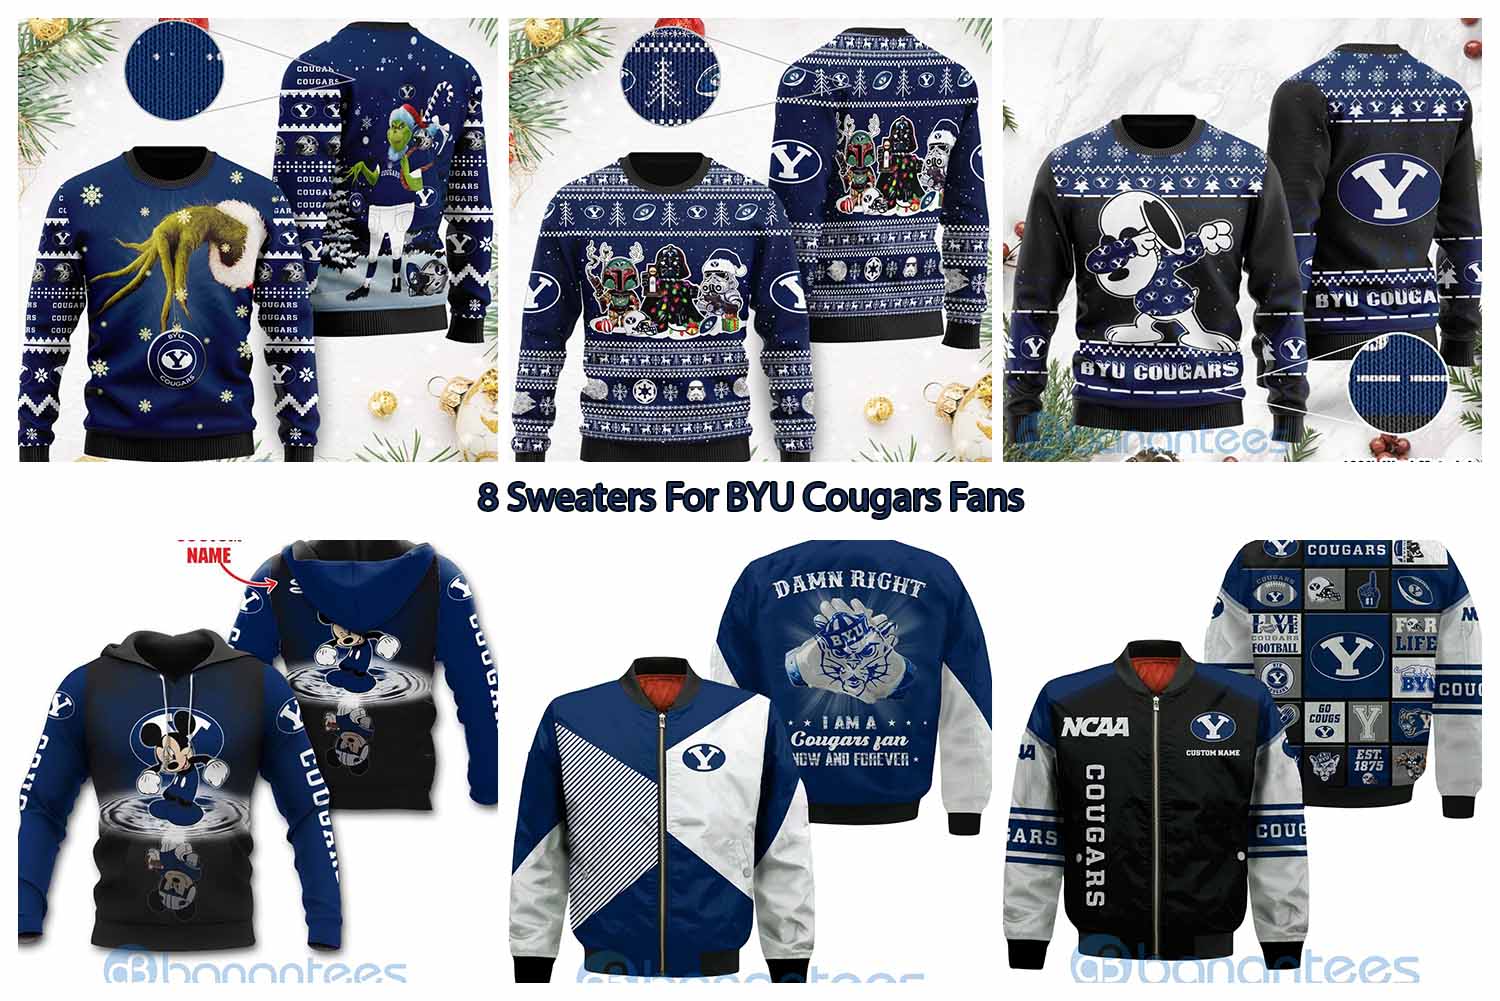 8 Sweaters For BYU Cougars Fans